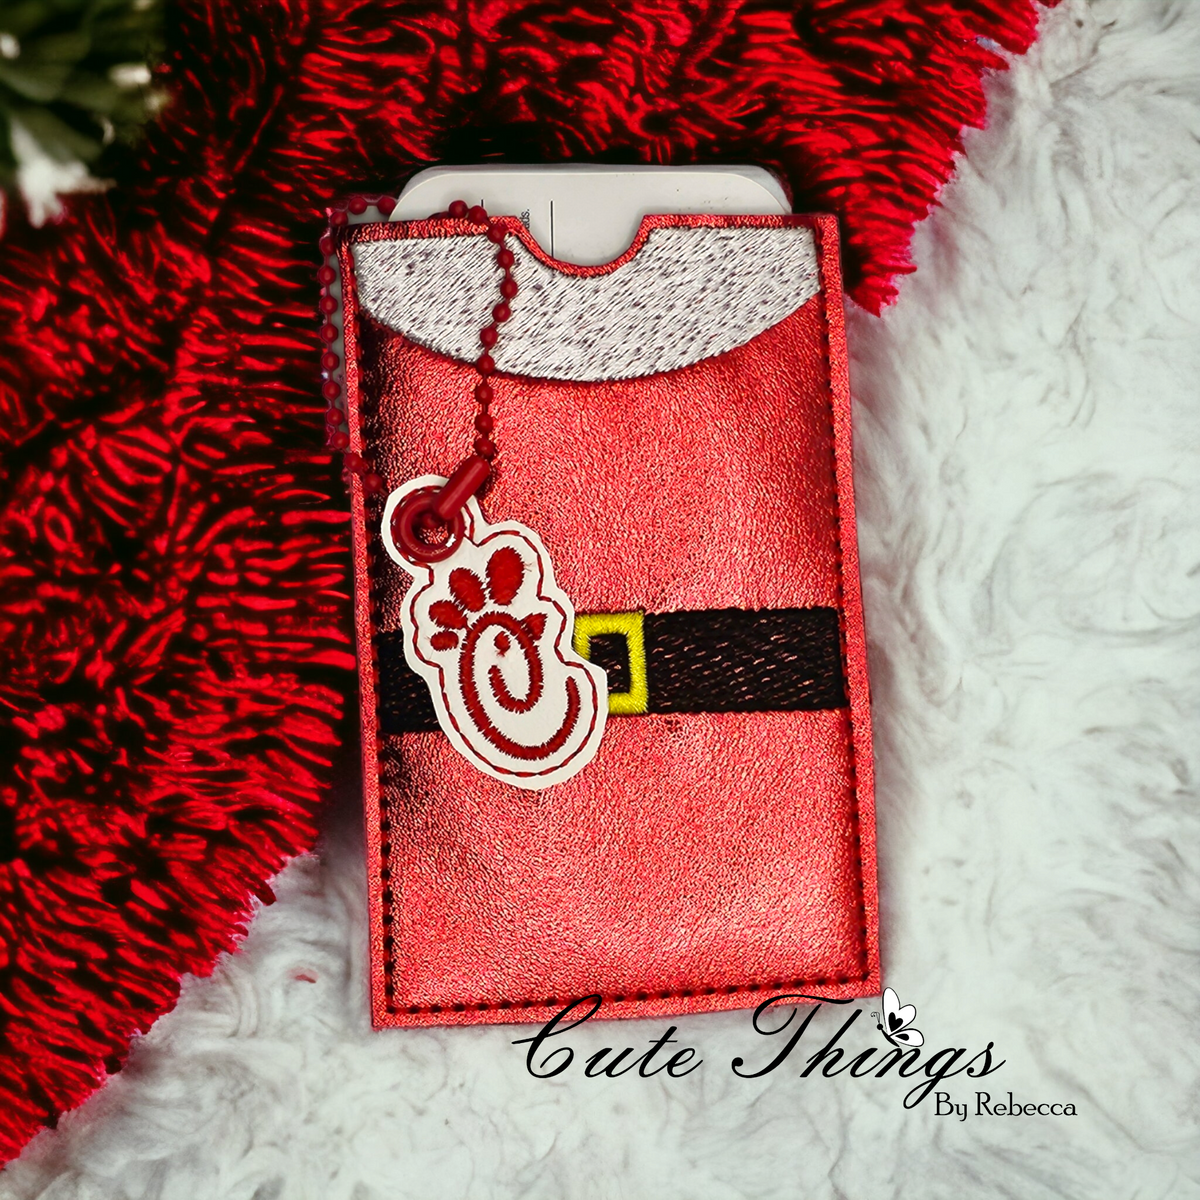 Chick-fil-a Bookmark/Ornament – Cute Things By Rebecca Embroidery